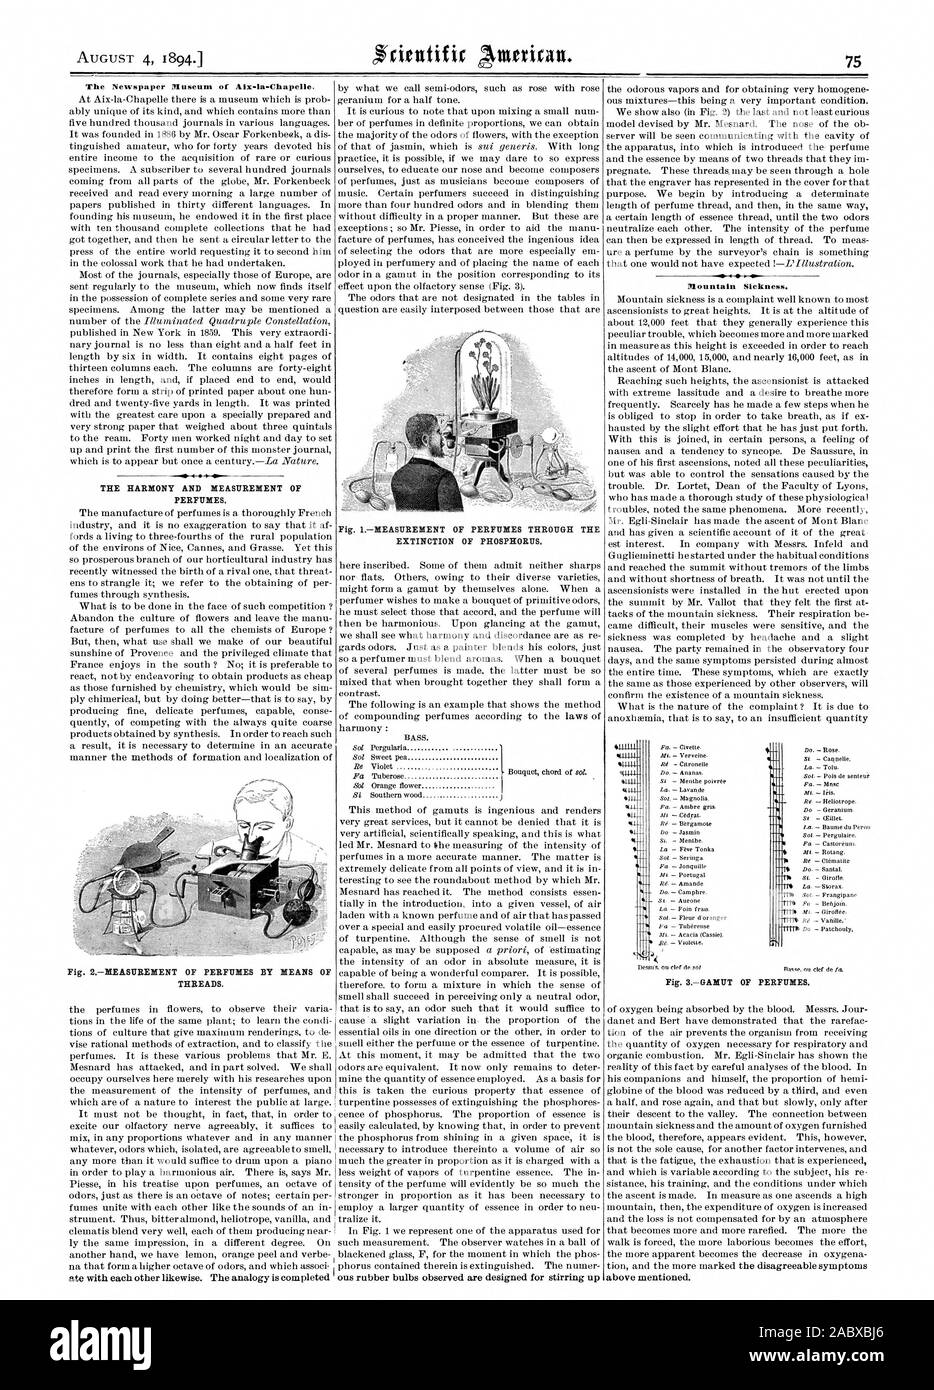 The Newspaper Museum of Aix-la-Chapelle. THE HARMONY AND MEASUREMENT OF PERFUMES. Fig. 2MEASUREMENT OF PERFUMES BY MEANS OF THREADS. Fig. IMEASUREMENT OF PERFUMES THROUGH THE EXTINCTION OF PHOSPHORUS. Mountain Sickness. Fig. 3GAMUT OF PERFUMES., scientific american, 1894-08-04 Stock Photo